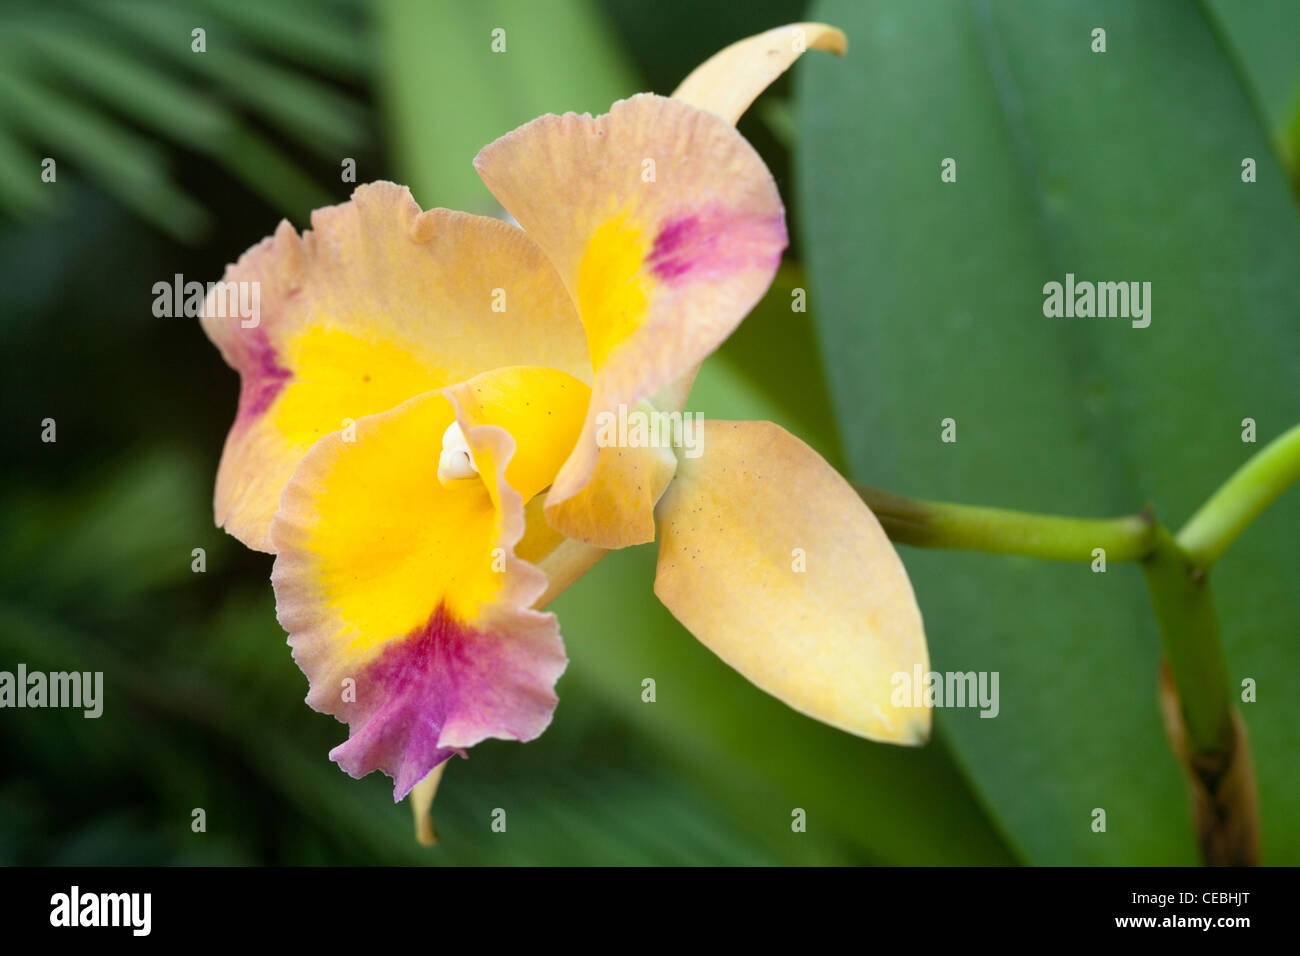 Cattleya, Orchidee, Orchidaceae, Orchid Stock Photo